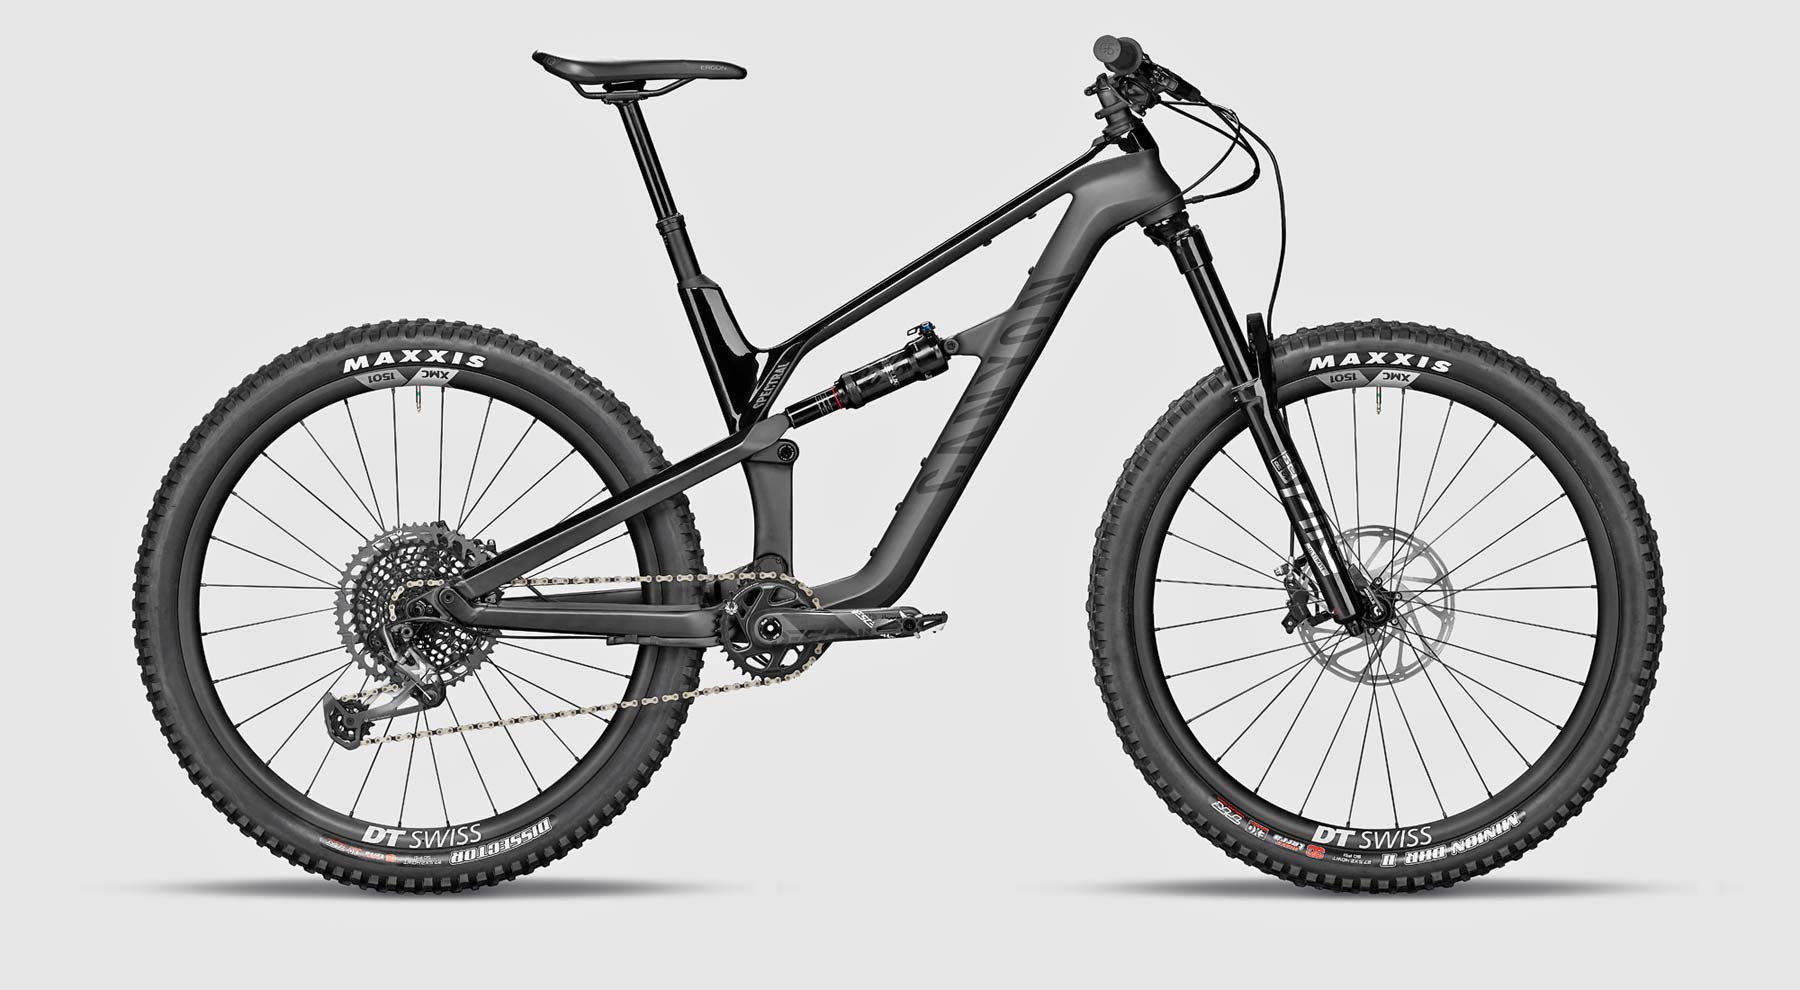 2021 Canyon Spectral trail bike, 27.5" 150mm all-mountain bike in carbon or alloy, CF 9